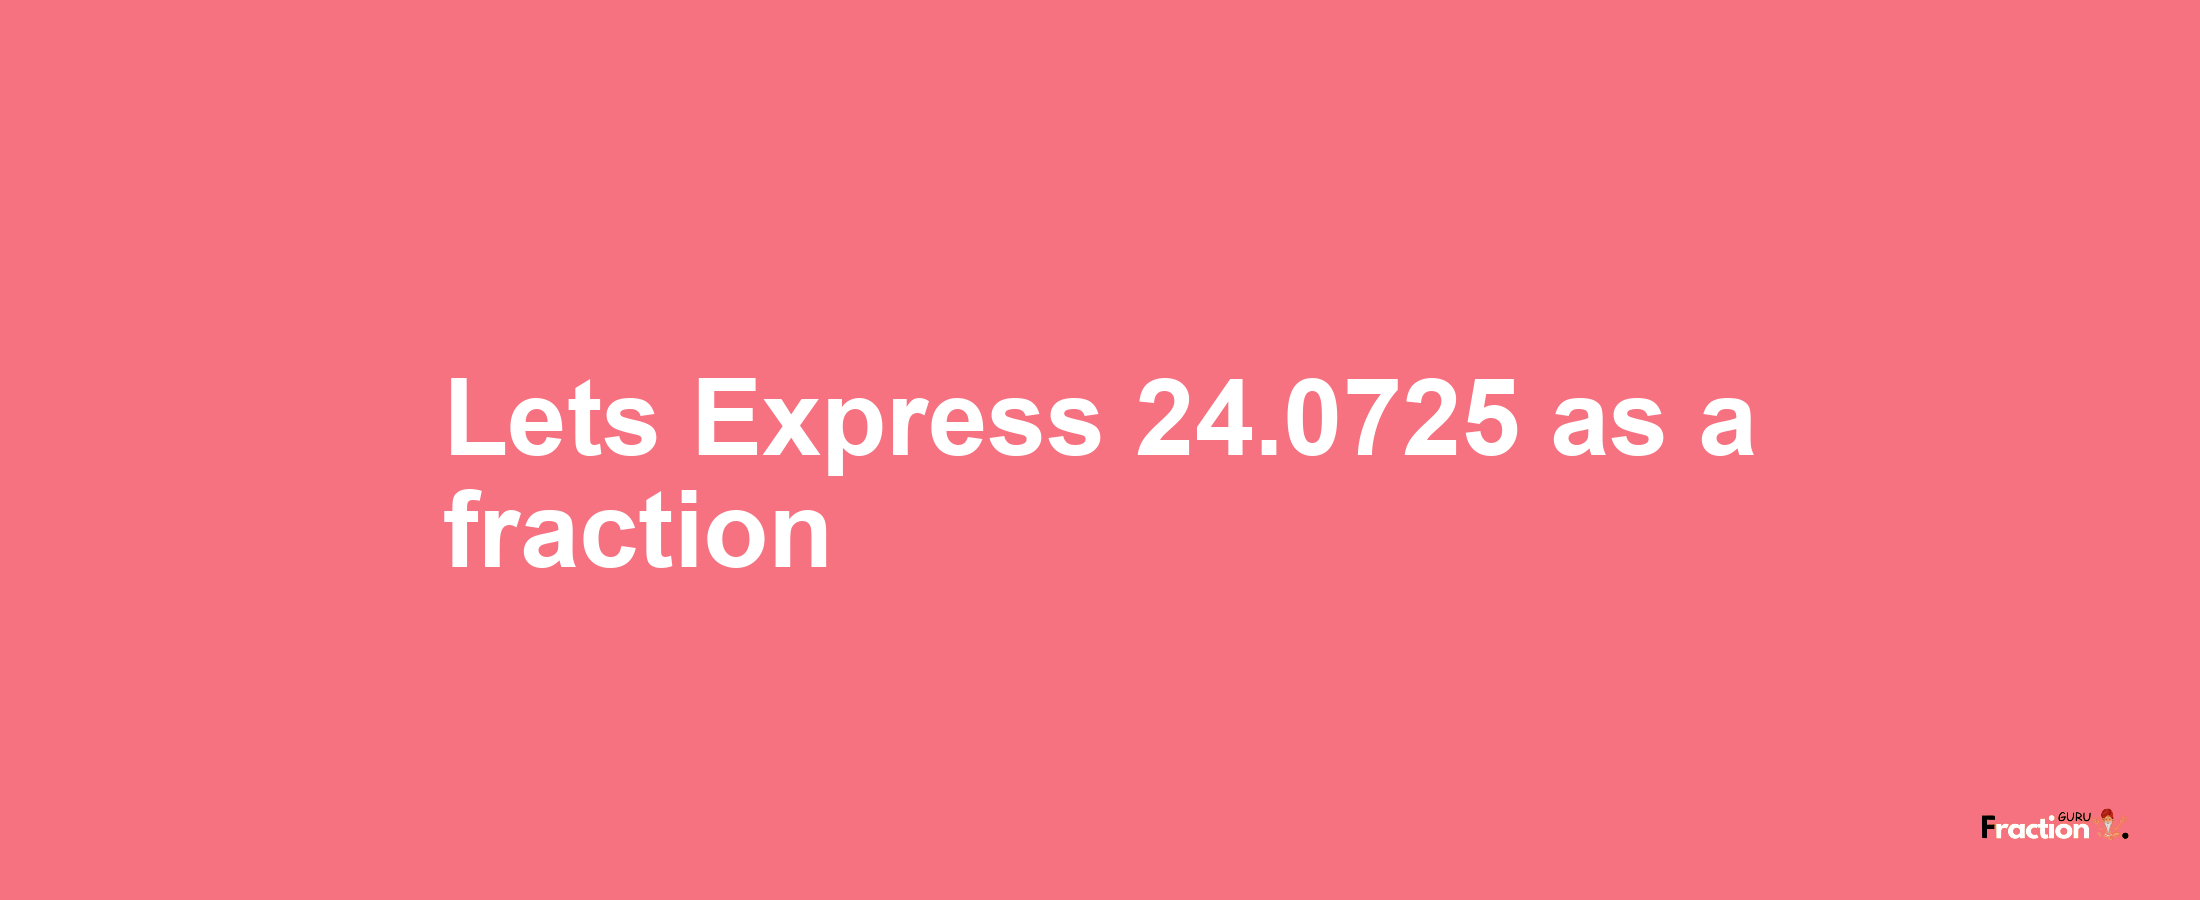 Lets Express 24.0725 as afraction